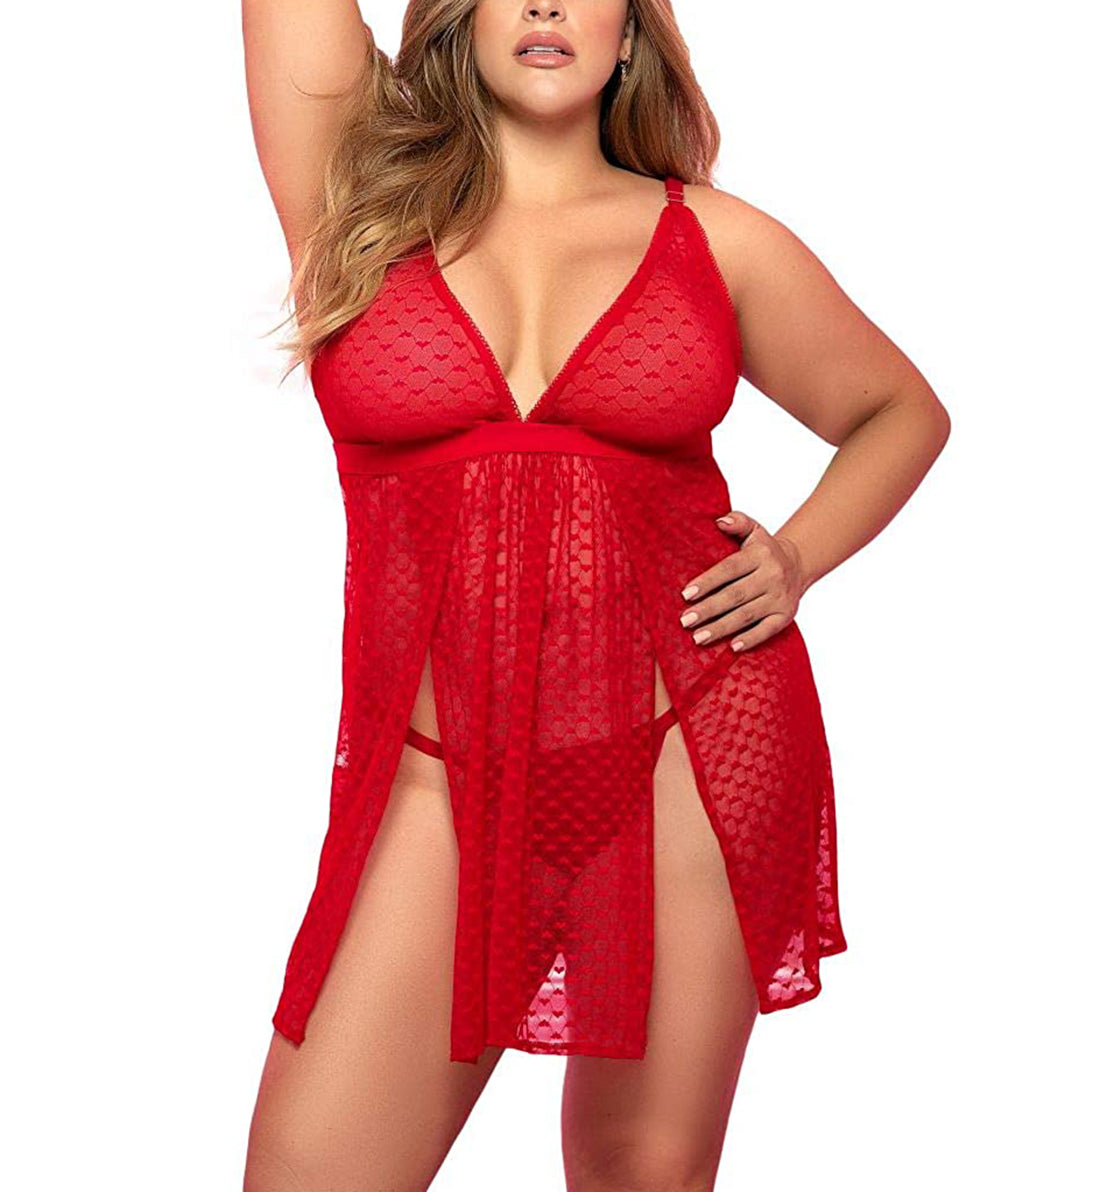 Mapale Split Side Sheer Babydoll with Matching G-String Plus Size (7353X),1X/2X,Red - Red,1X/2X